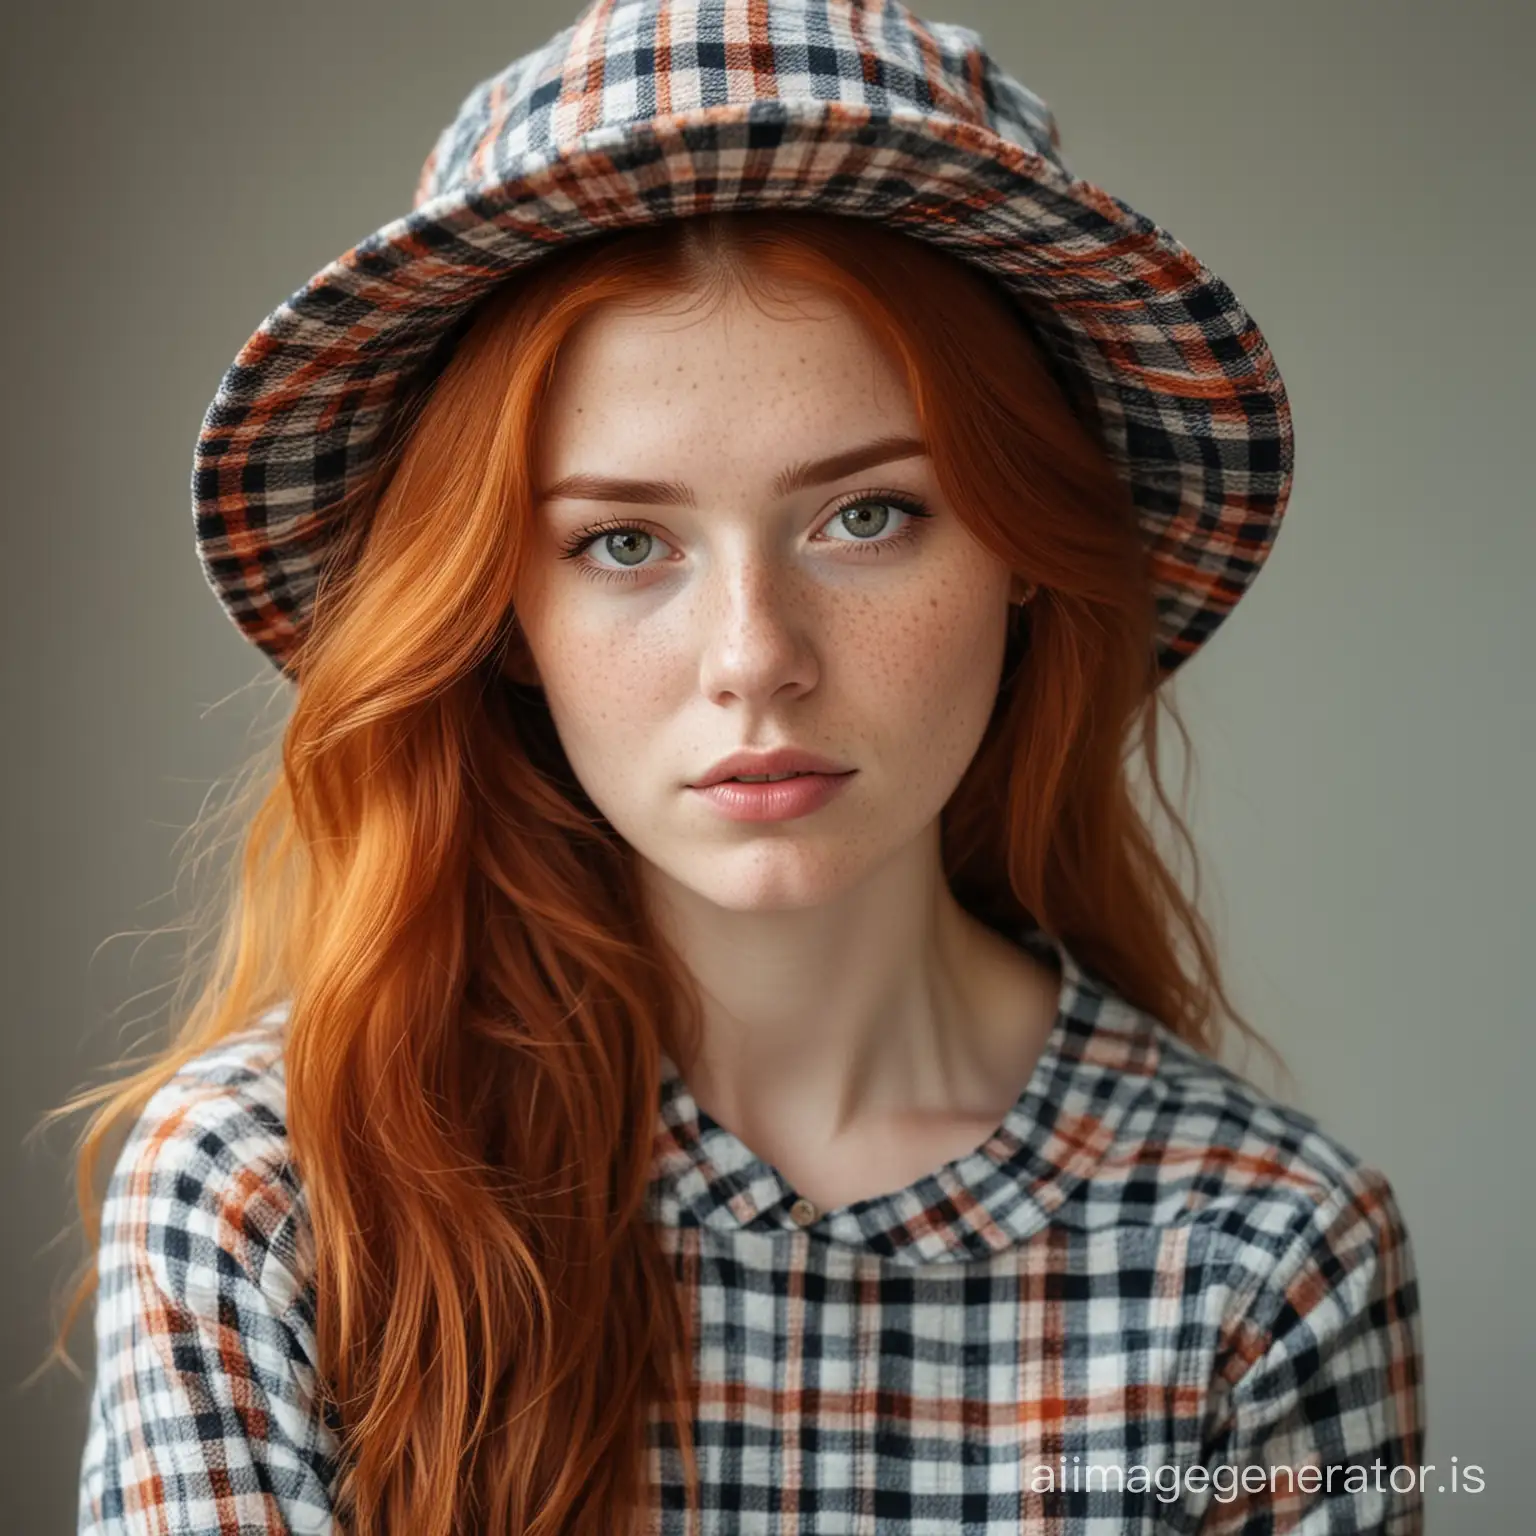 The red-haired girl in a hat in a plaid dress and with freckles on her face